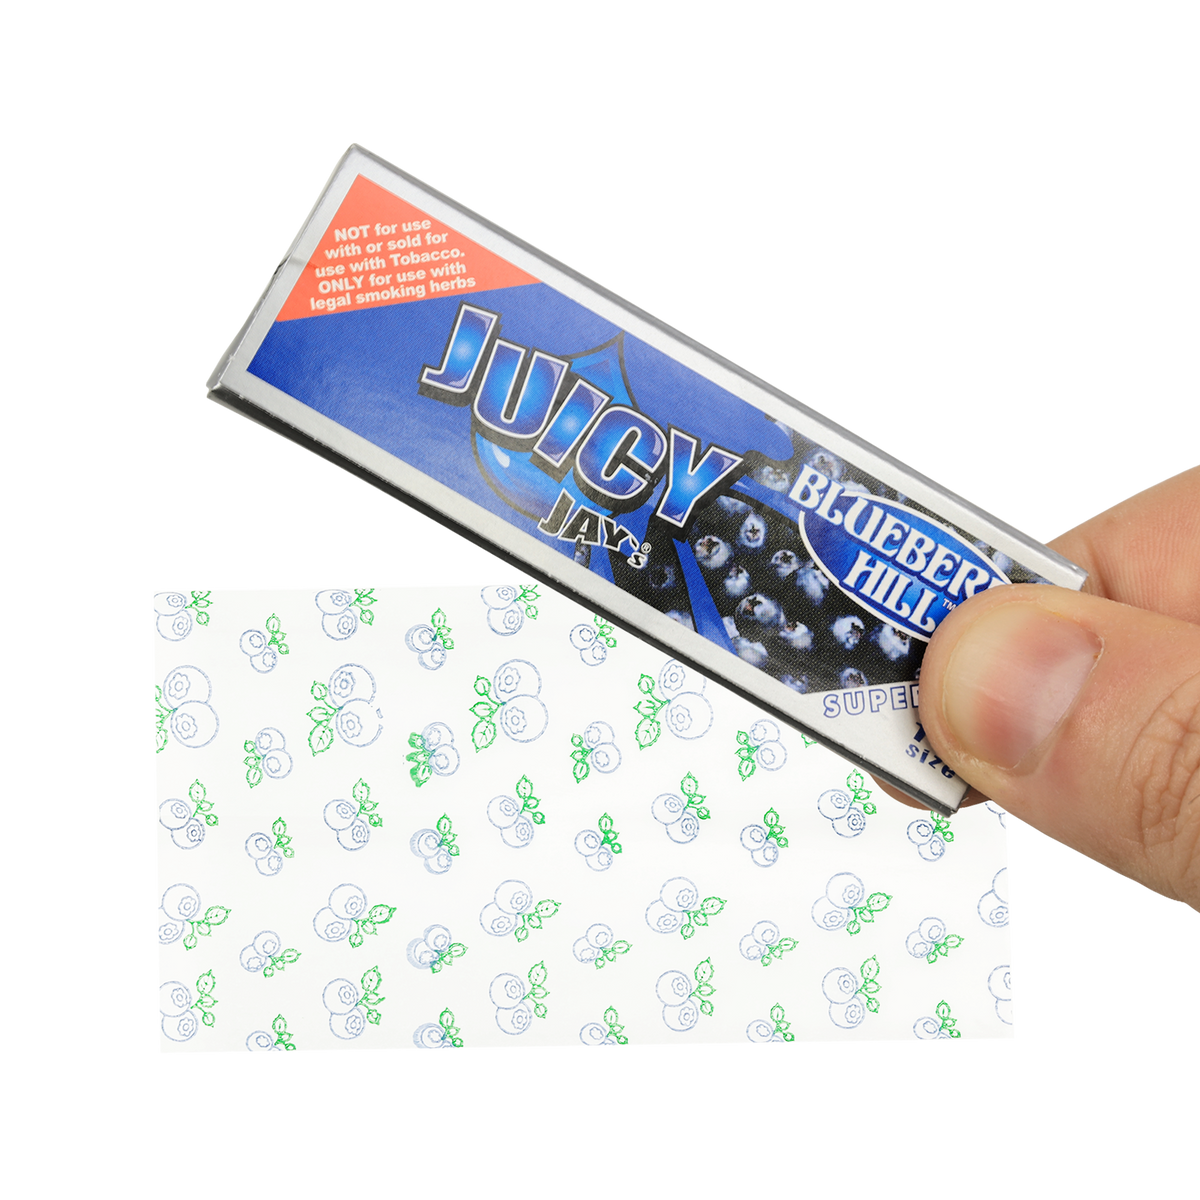 Juicy Jays 1 1/4 Superfine White Grape Flavored Hemp Rolling Papers Rolling Papers esd-official